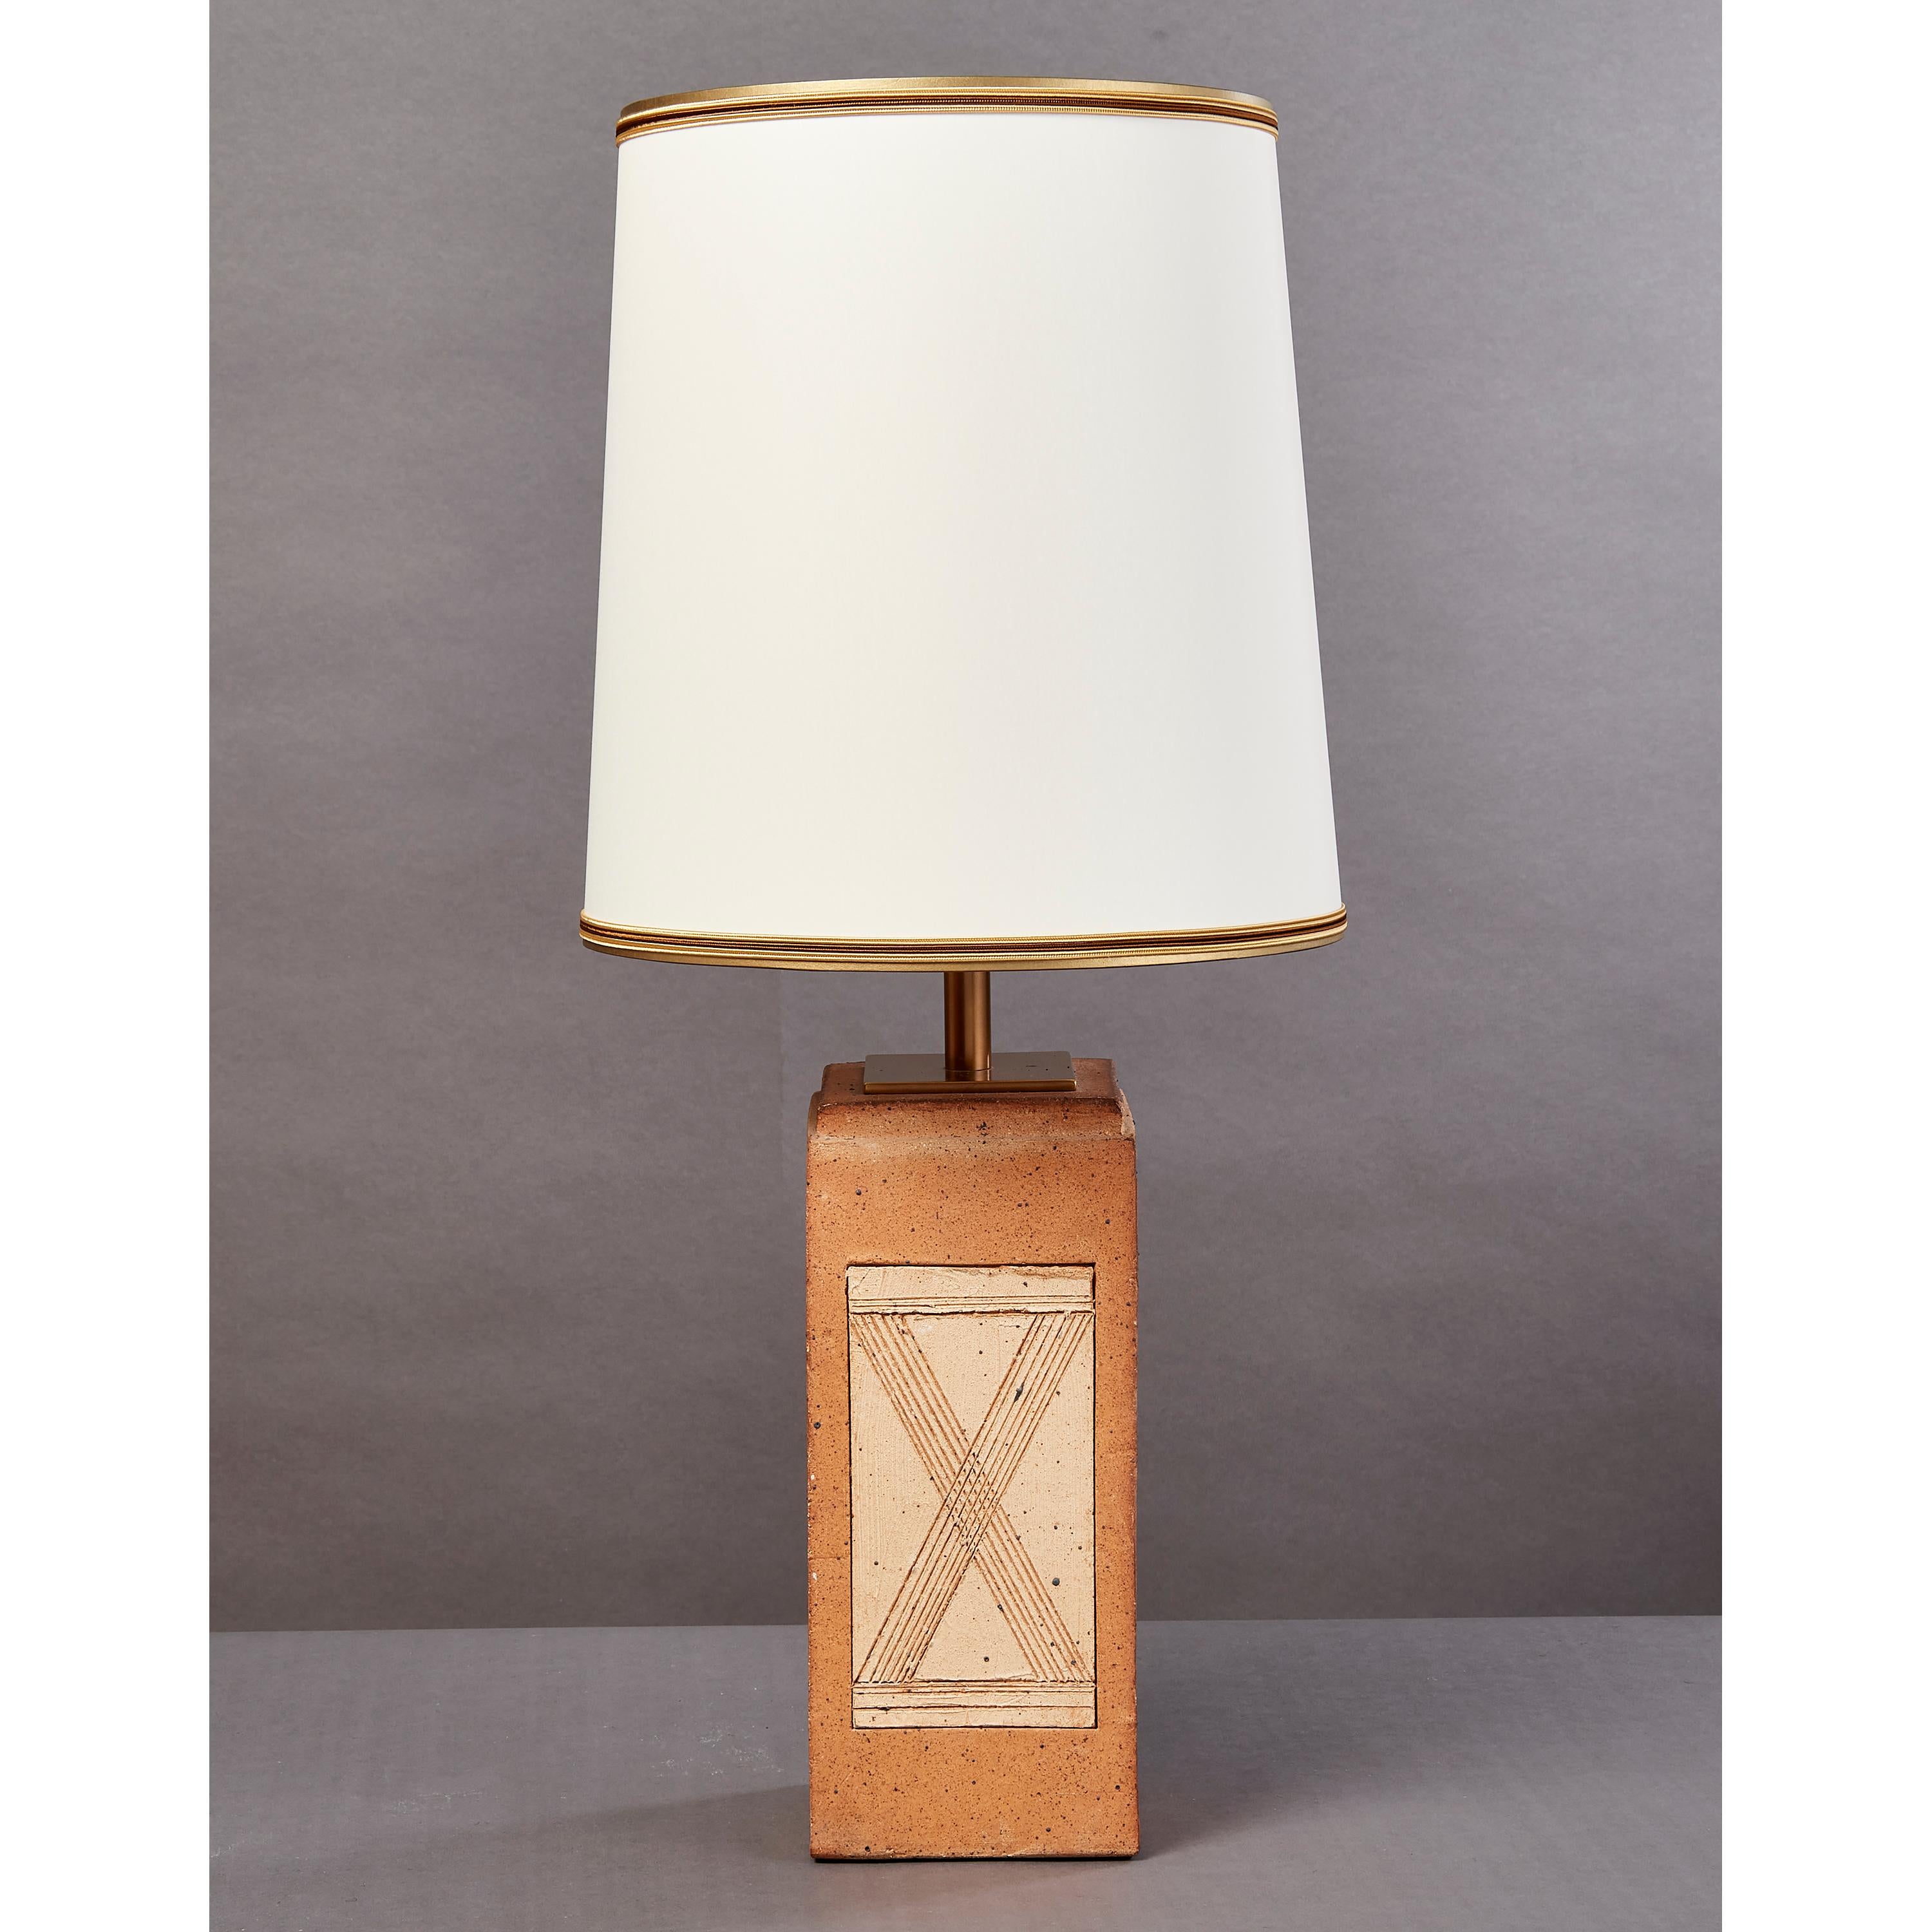 French Geometric Ceramic Lamp with Abstract Decor, France, 1970s